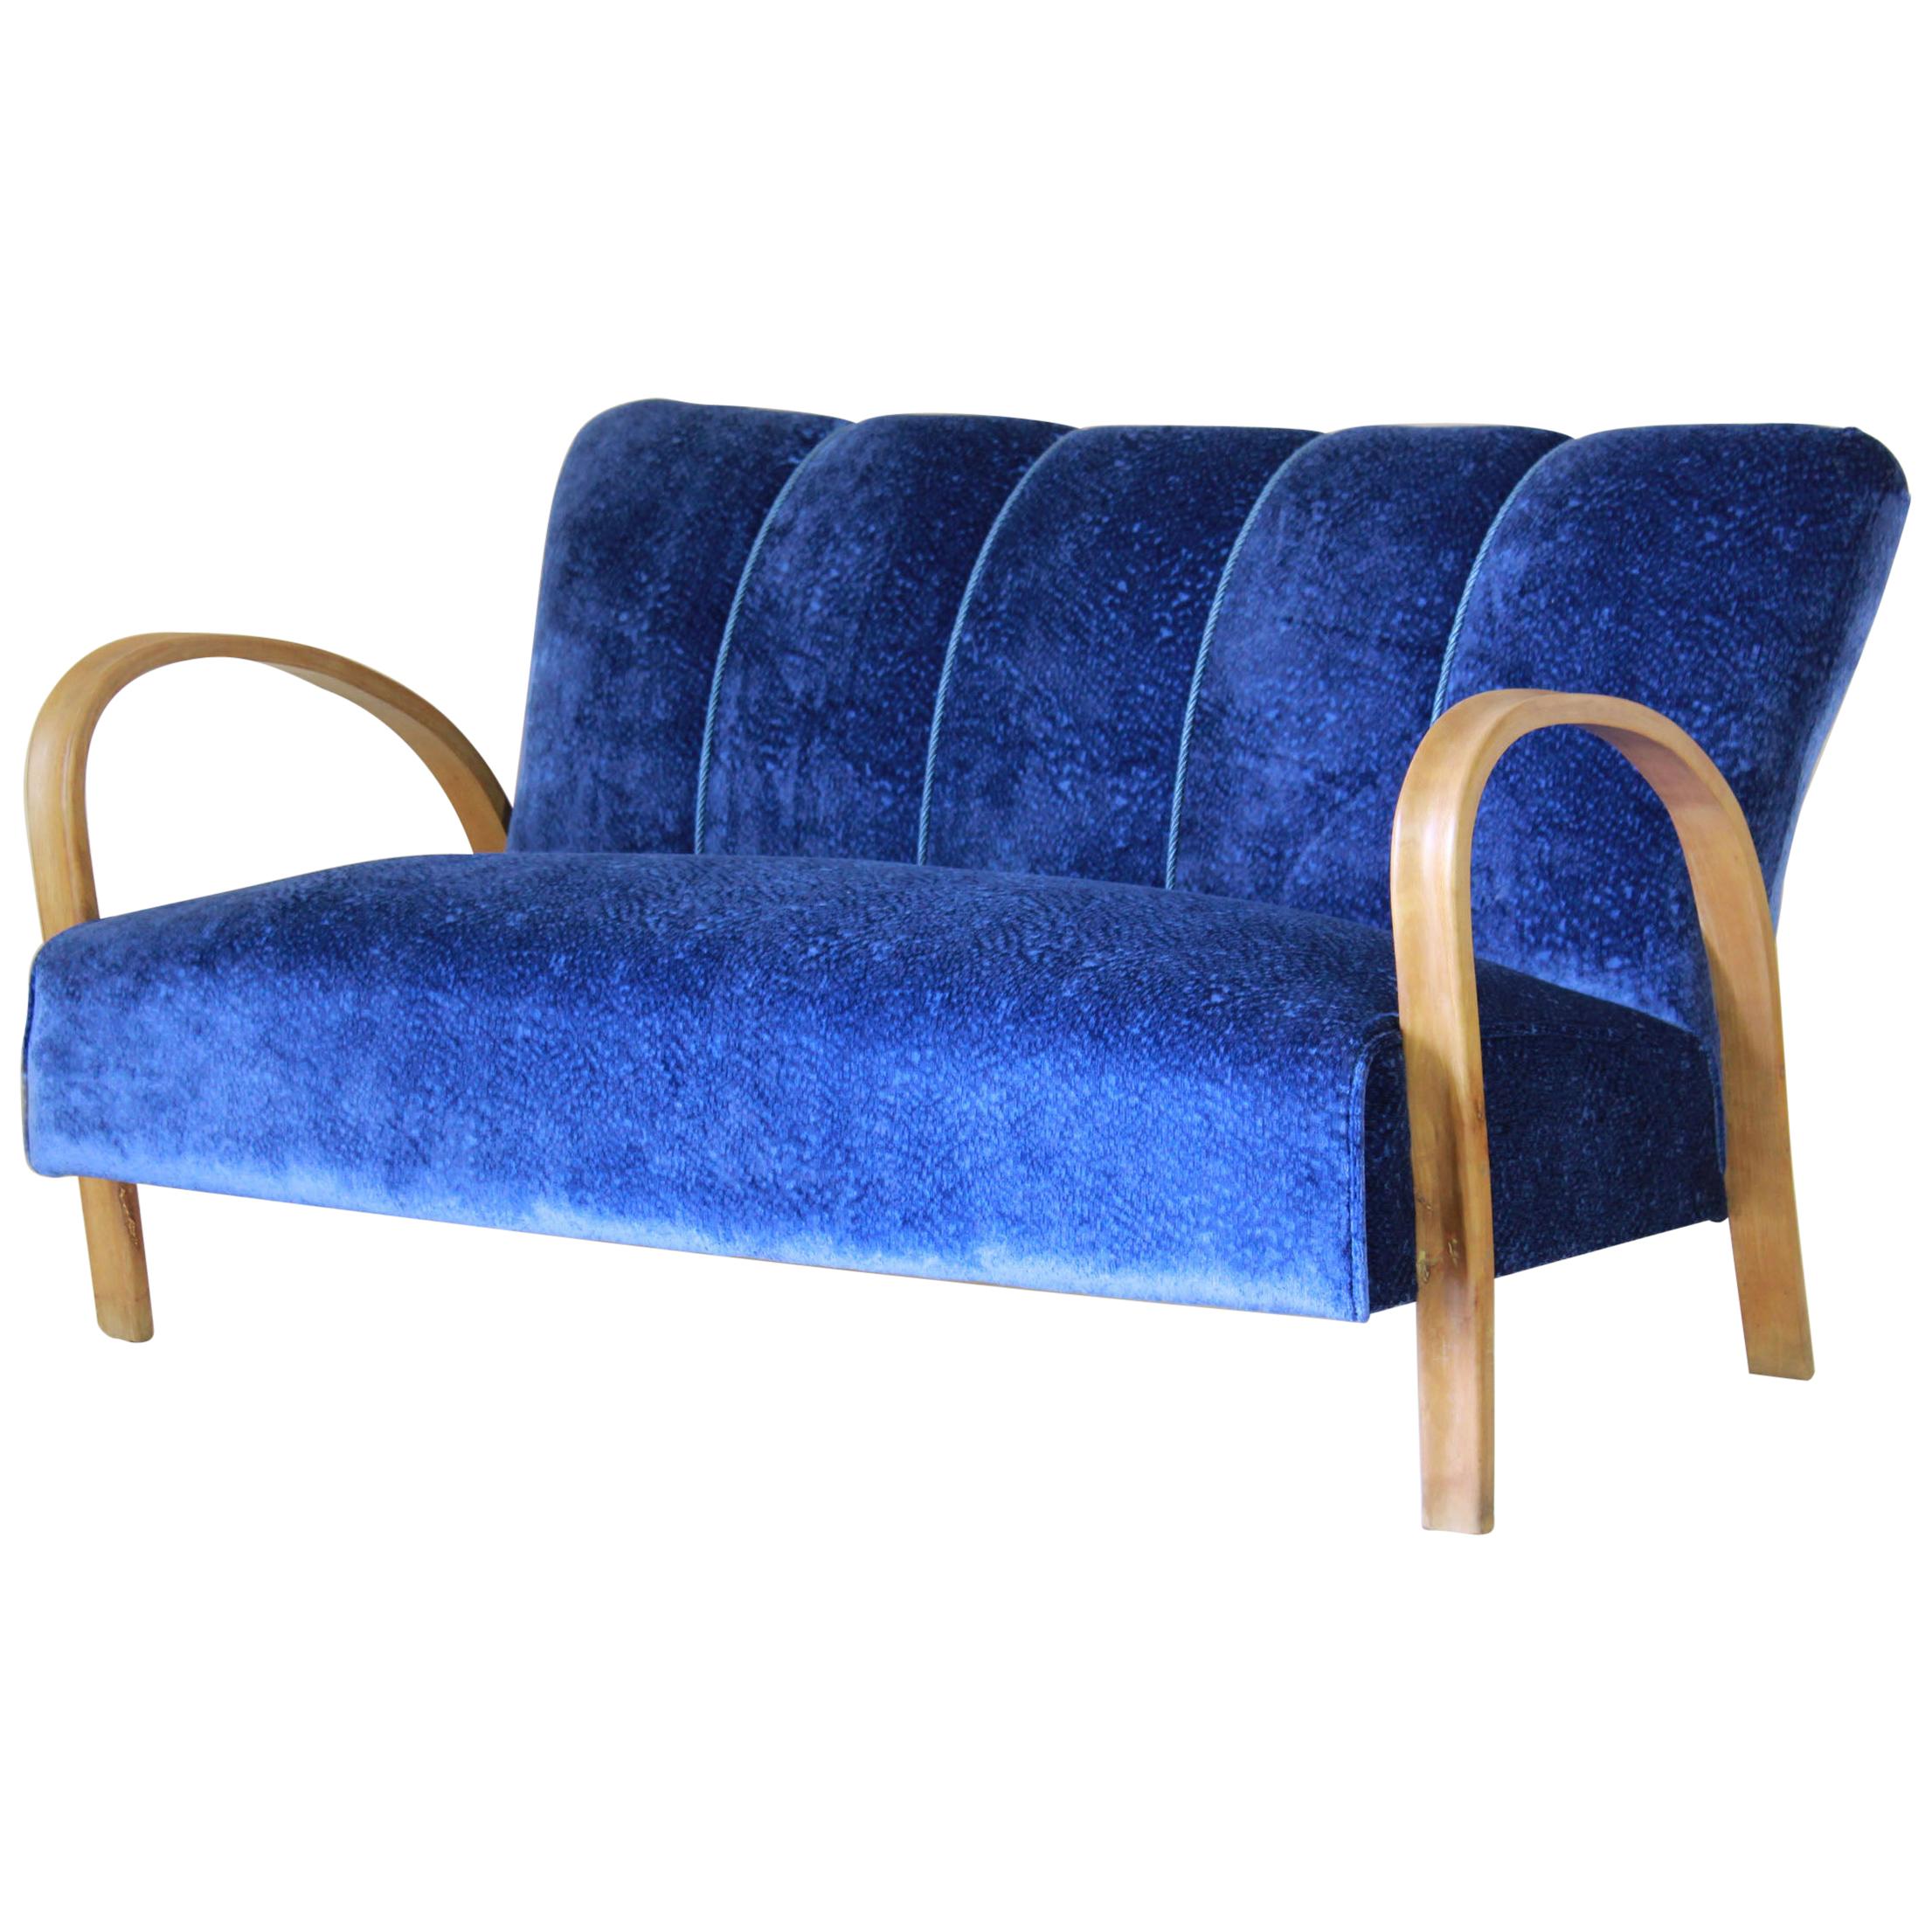 1940s vintage sofa in art deco style with velvet blue cover